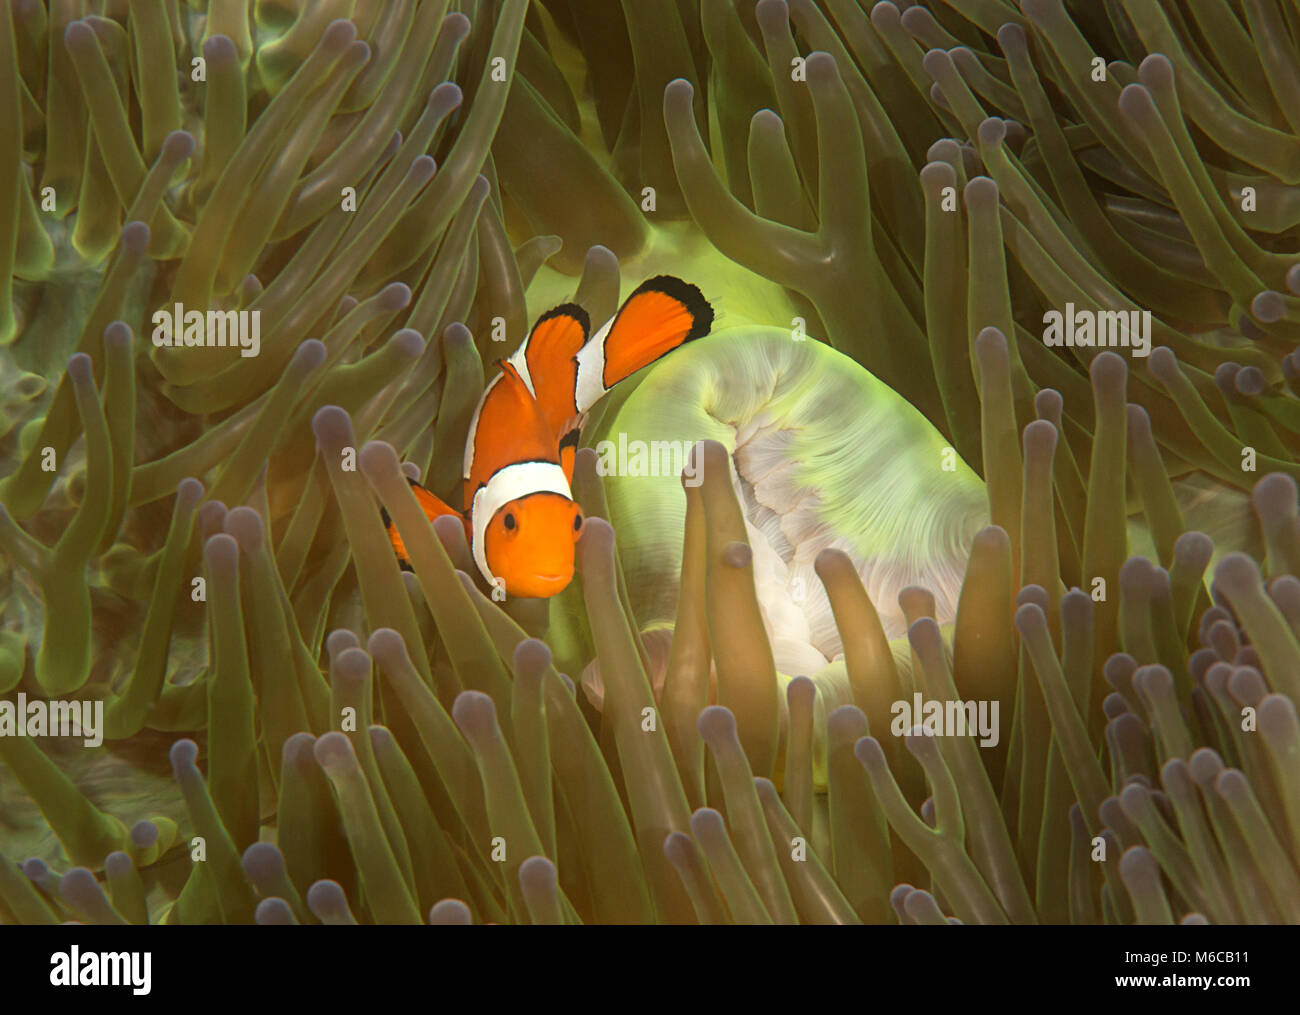 Ocellaris clownfish ( Aphiprion ocellaris ) or false clown anemonefish shelters itself among the venomous tentacles of a Heteractis magnifica Stock Photo